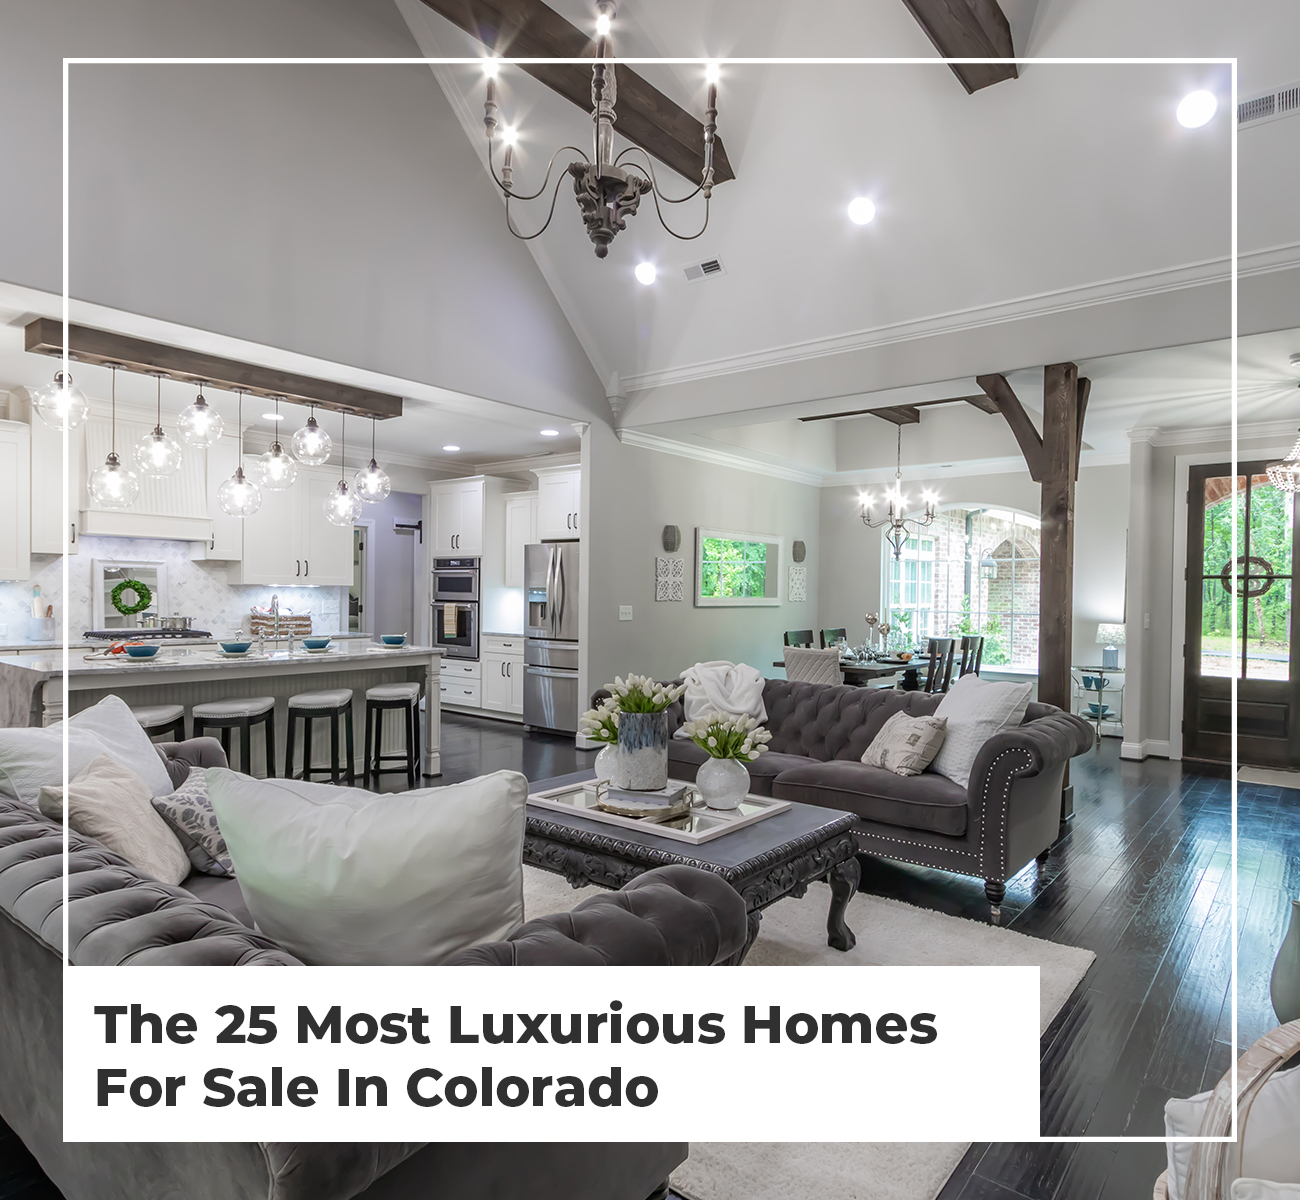 25 Most Luxurious Homes For Sale In Colorado - Main Image